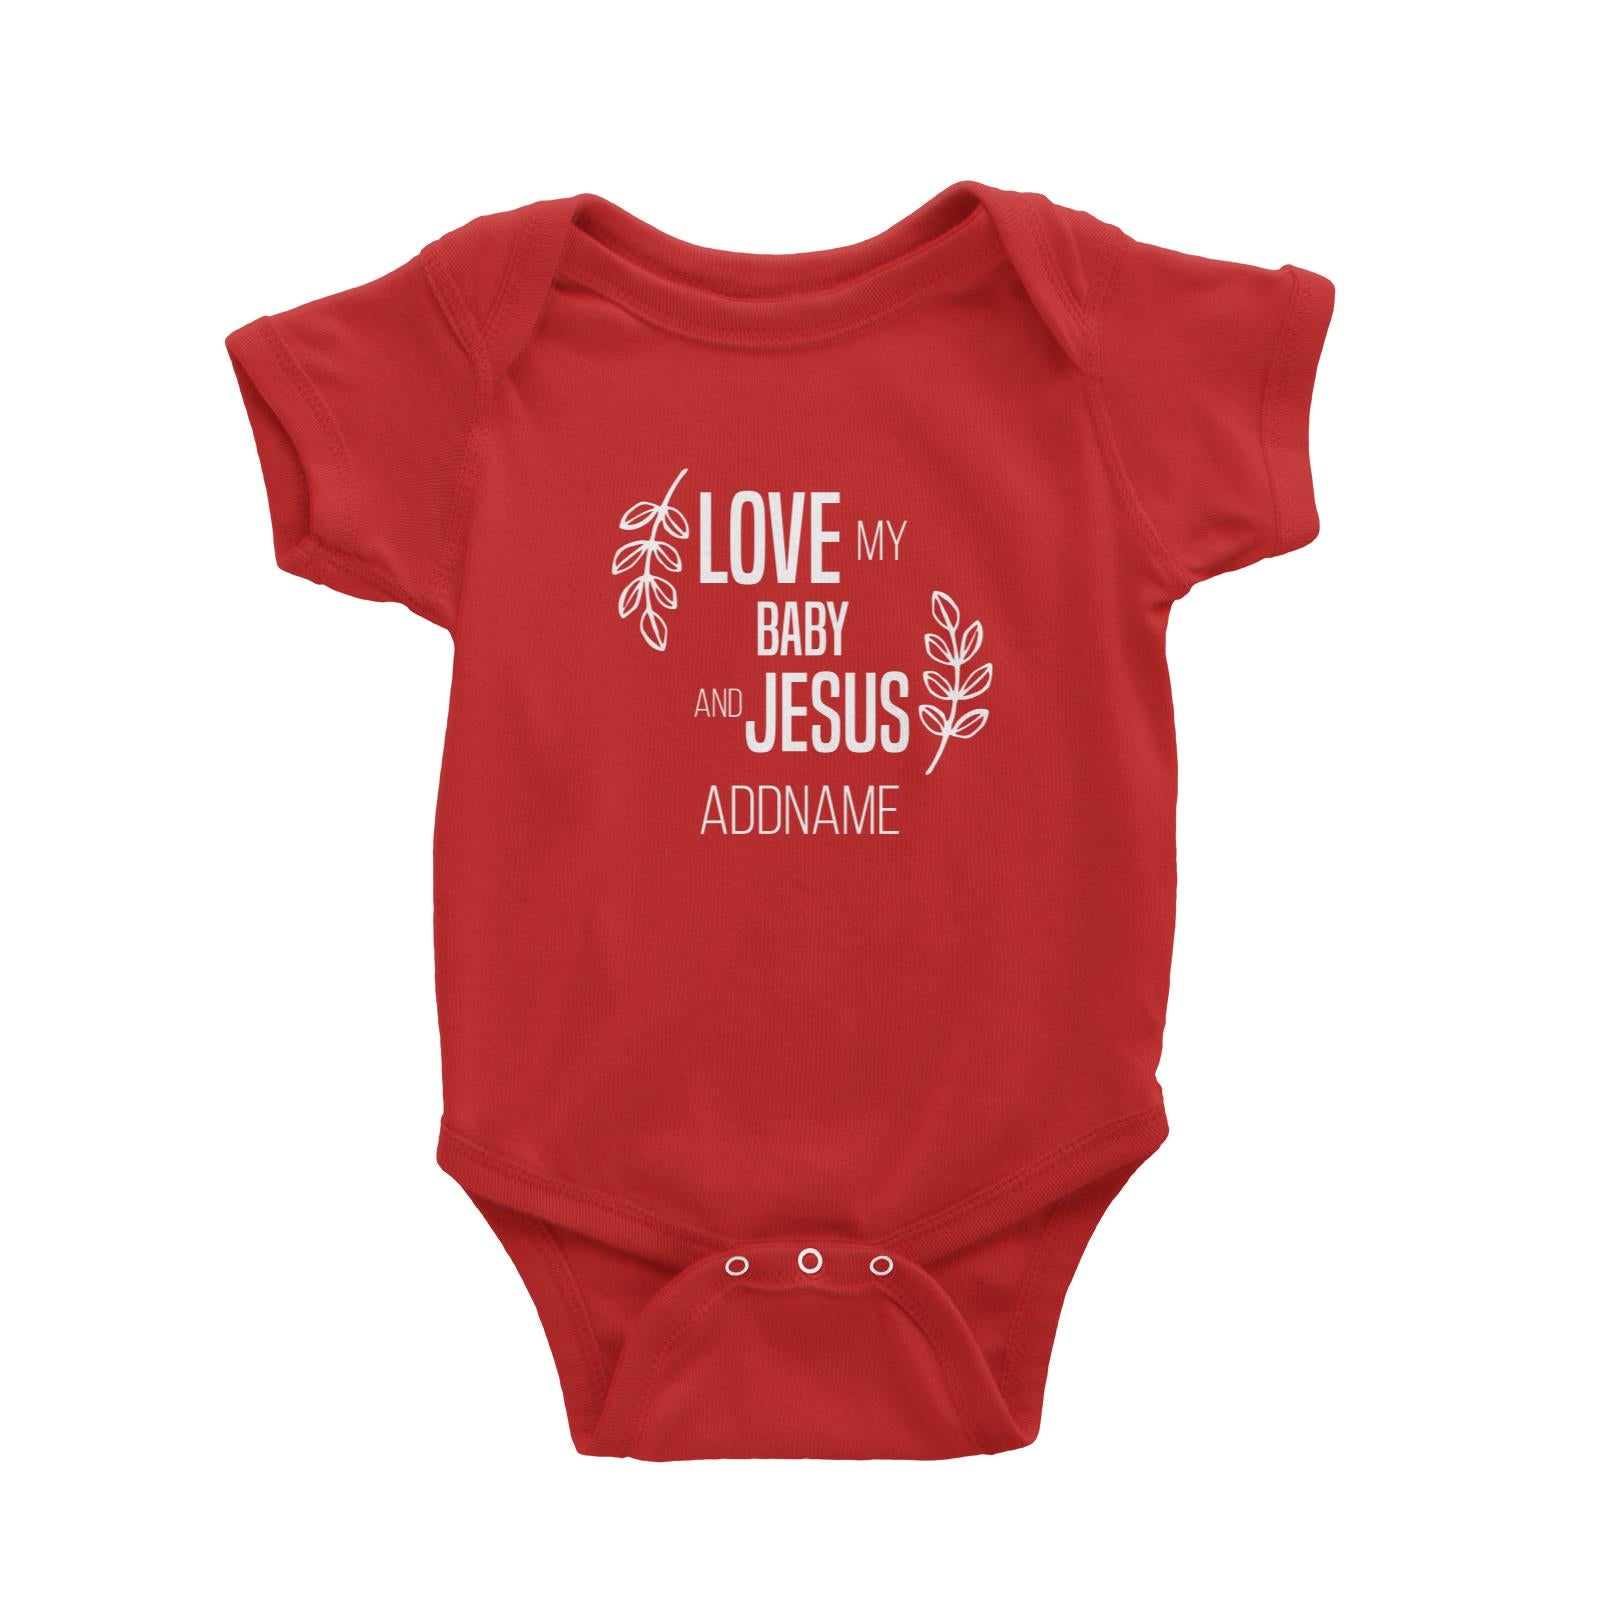 Christian Series Love My Baby And Jesus Addname Baby Romper